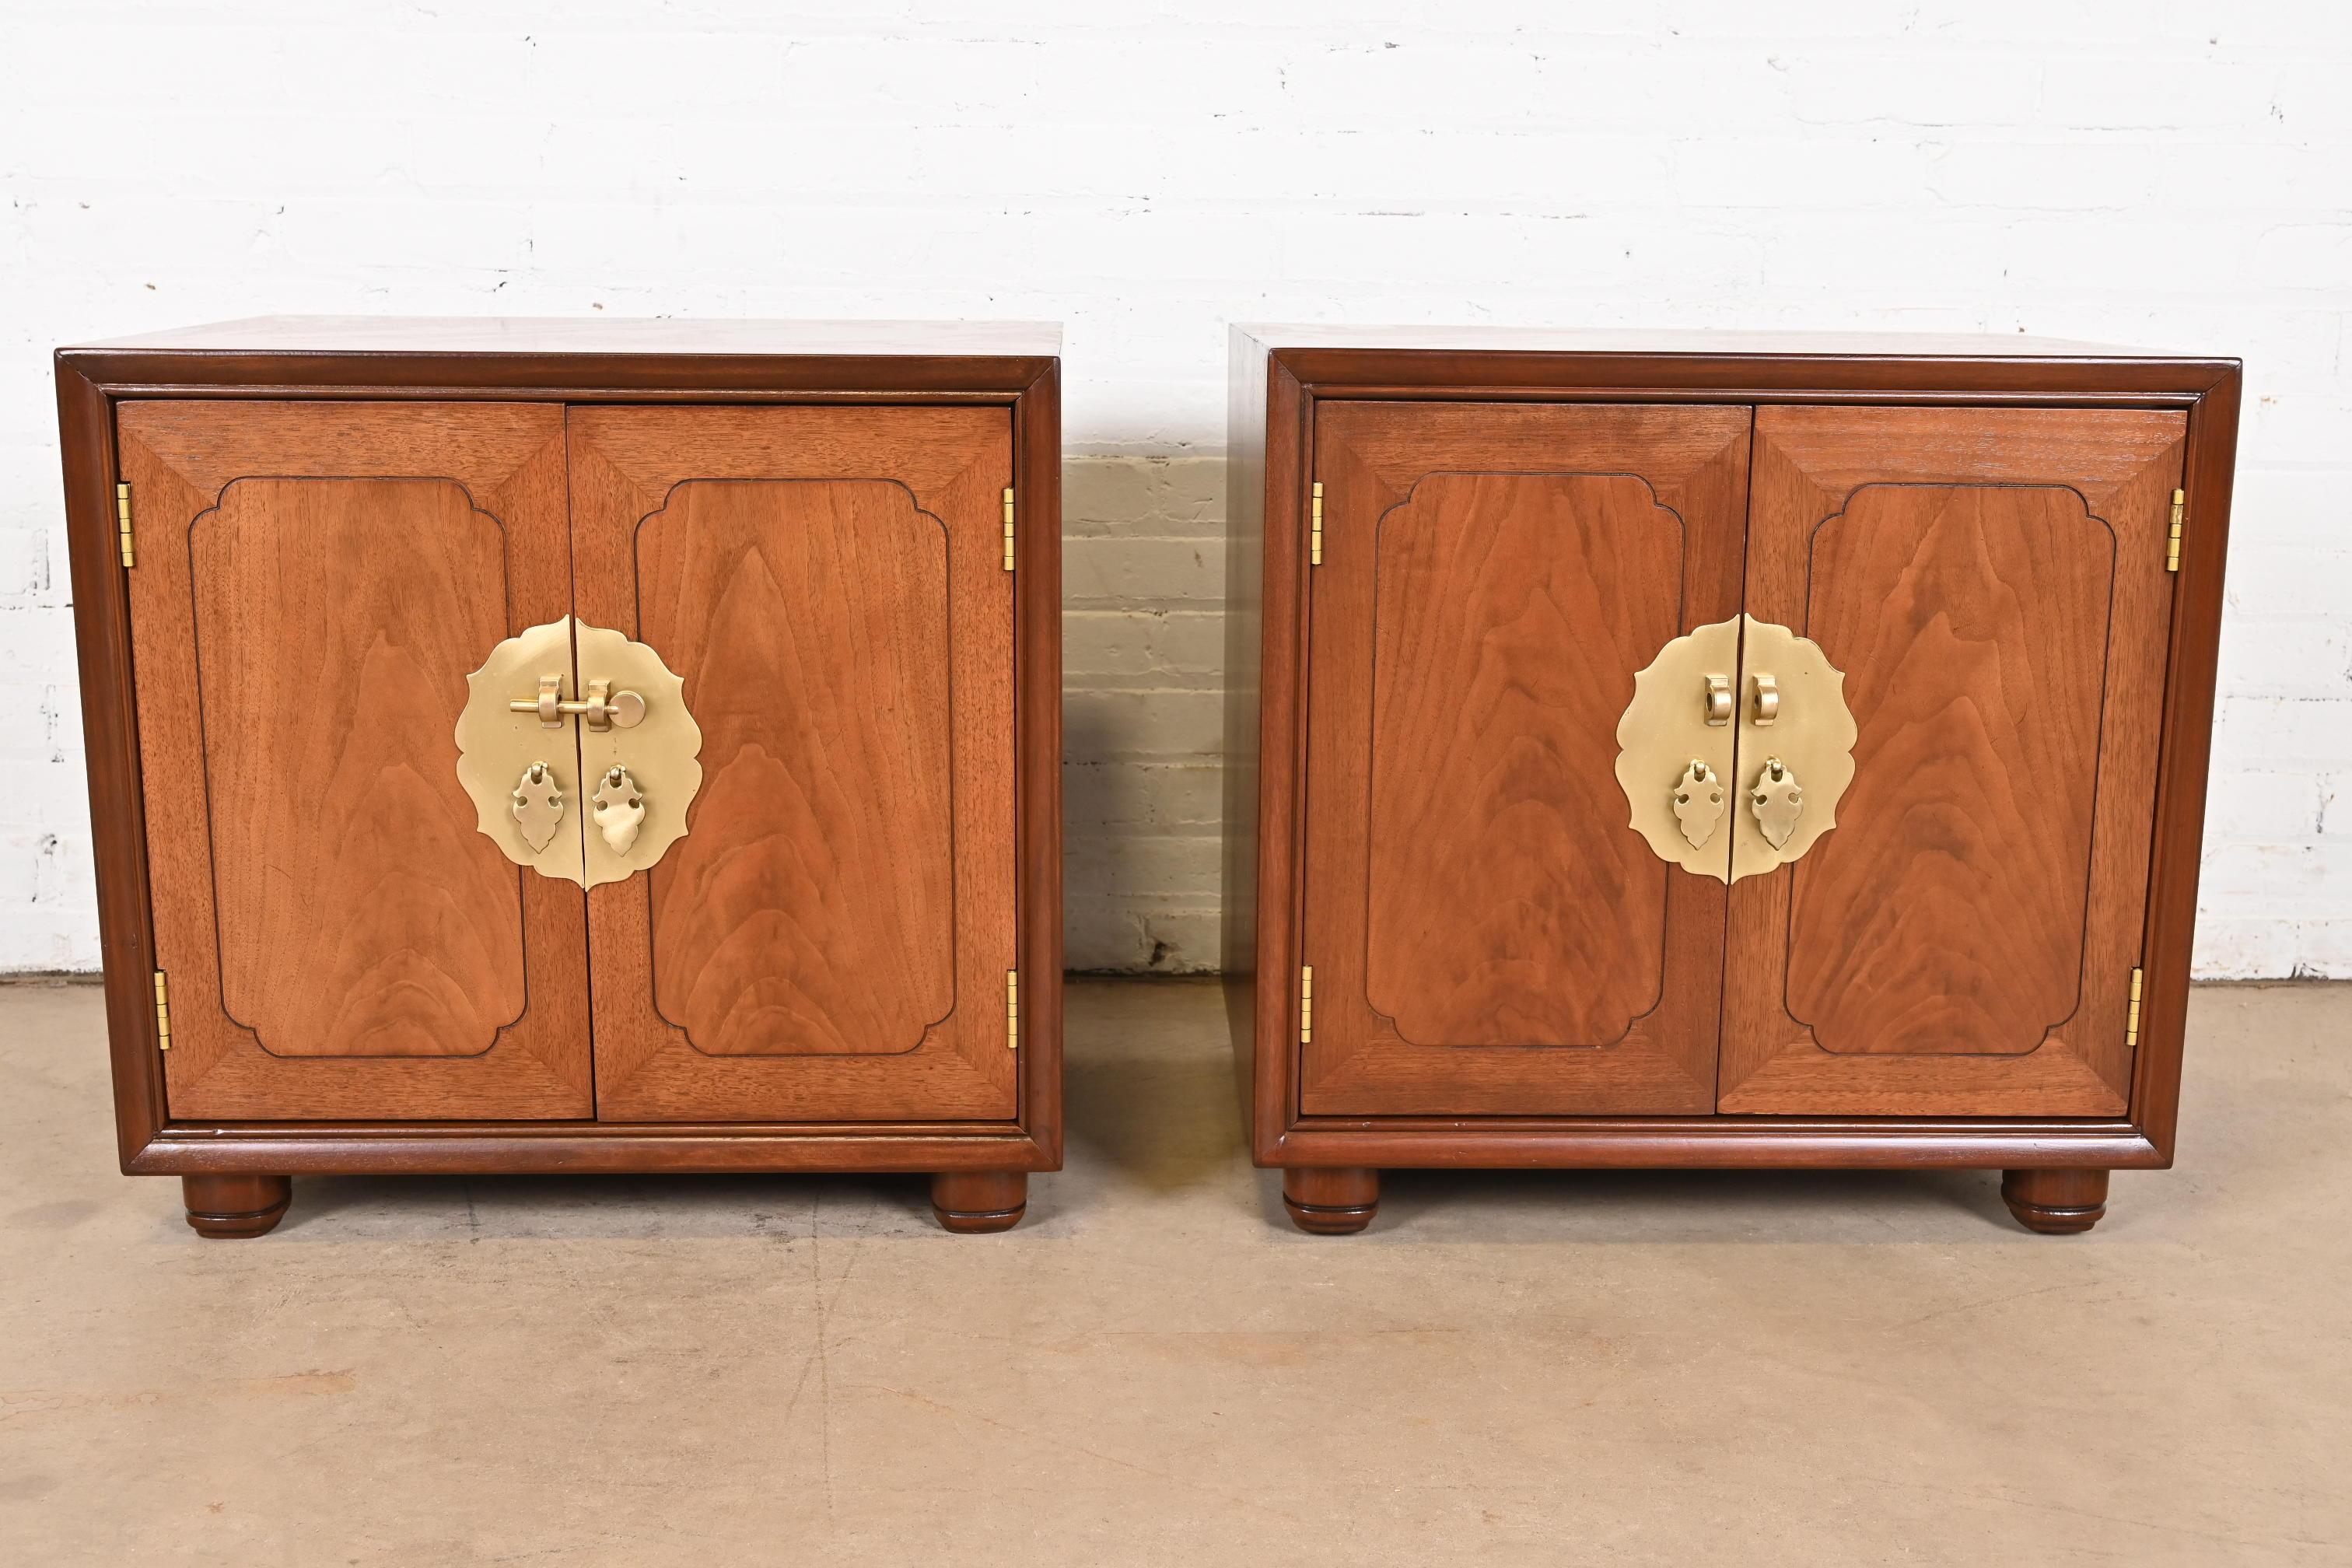 A gorgeous pair of mid-century modern Hollywood Regency Chinoiserie nightstands or bedside chests

Attributed to Henredon

USA, Circa 1970s

Carved walnut, with original Asian-inspired brass hardware.

Measures: 24